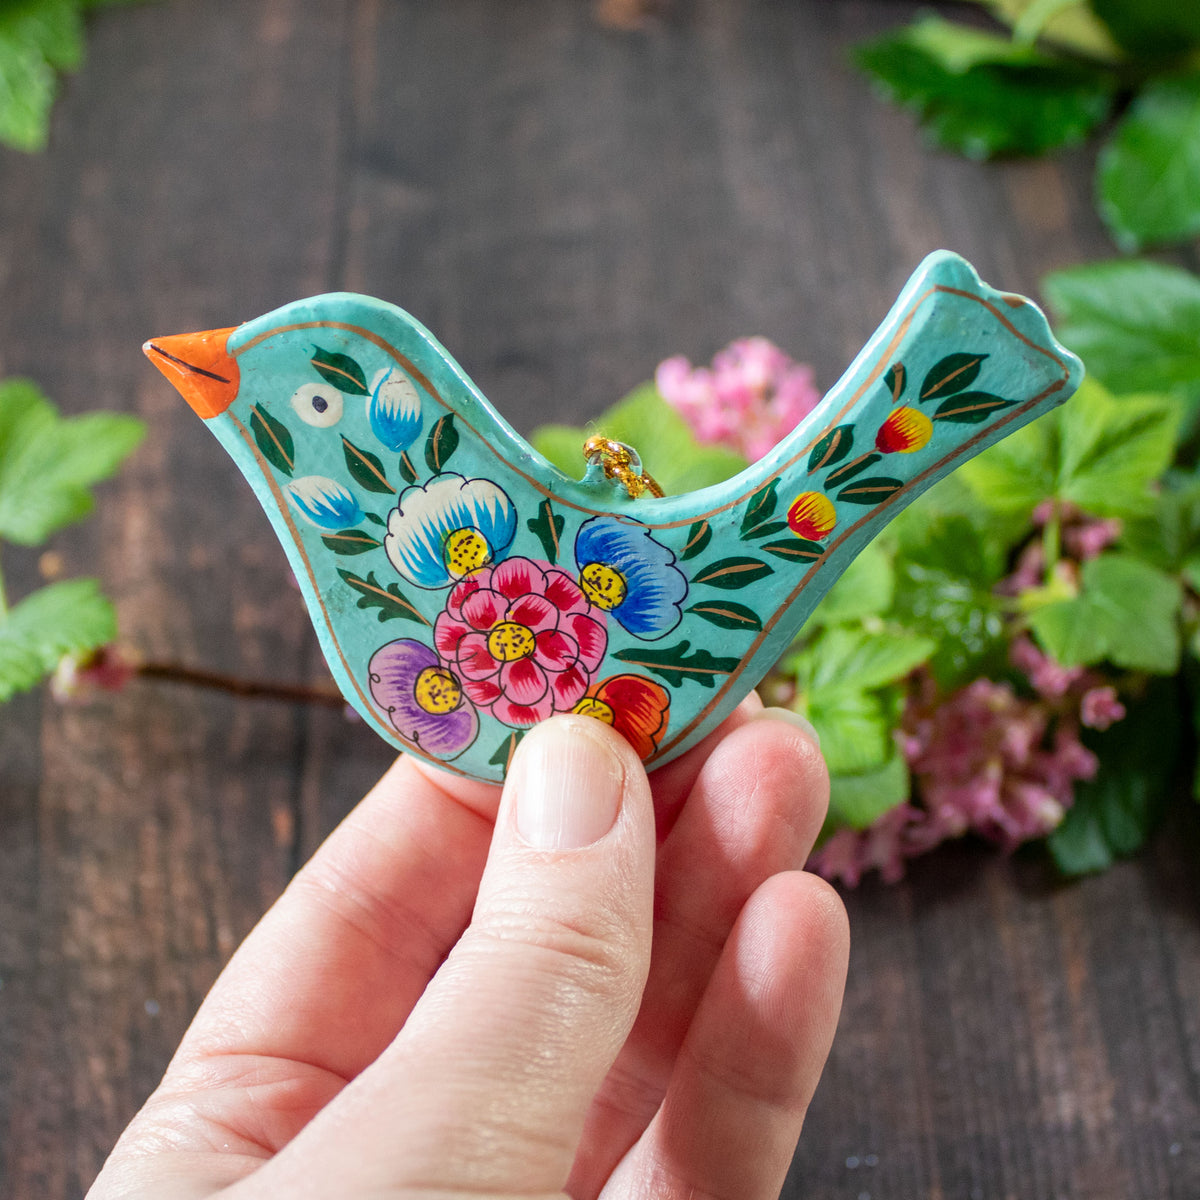 Hanging Spring Decoration - Painted Bird- Turquoise Flowers